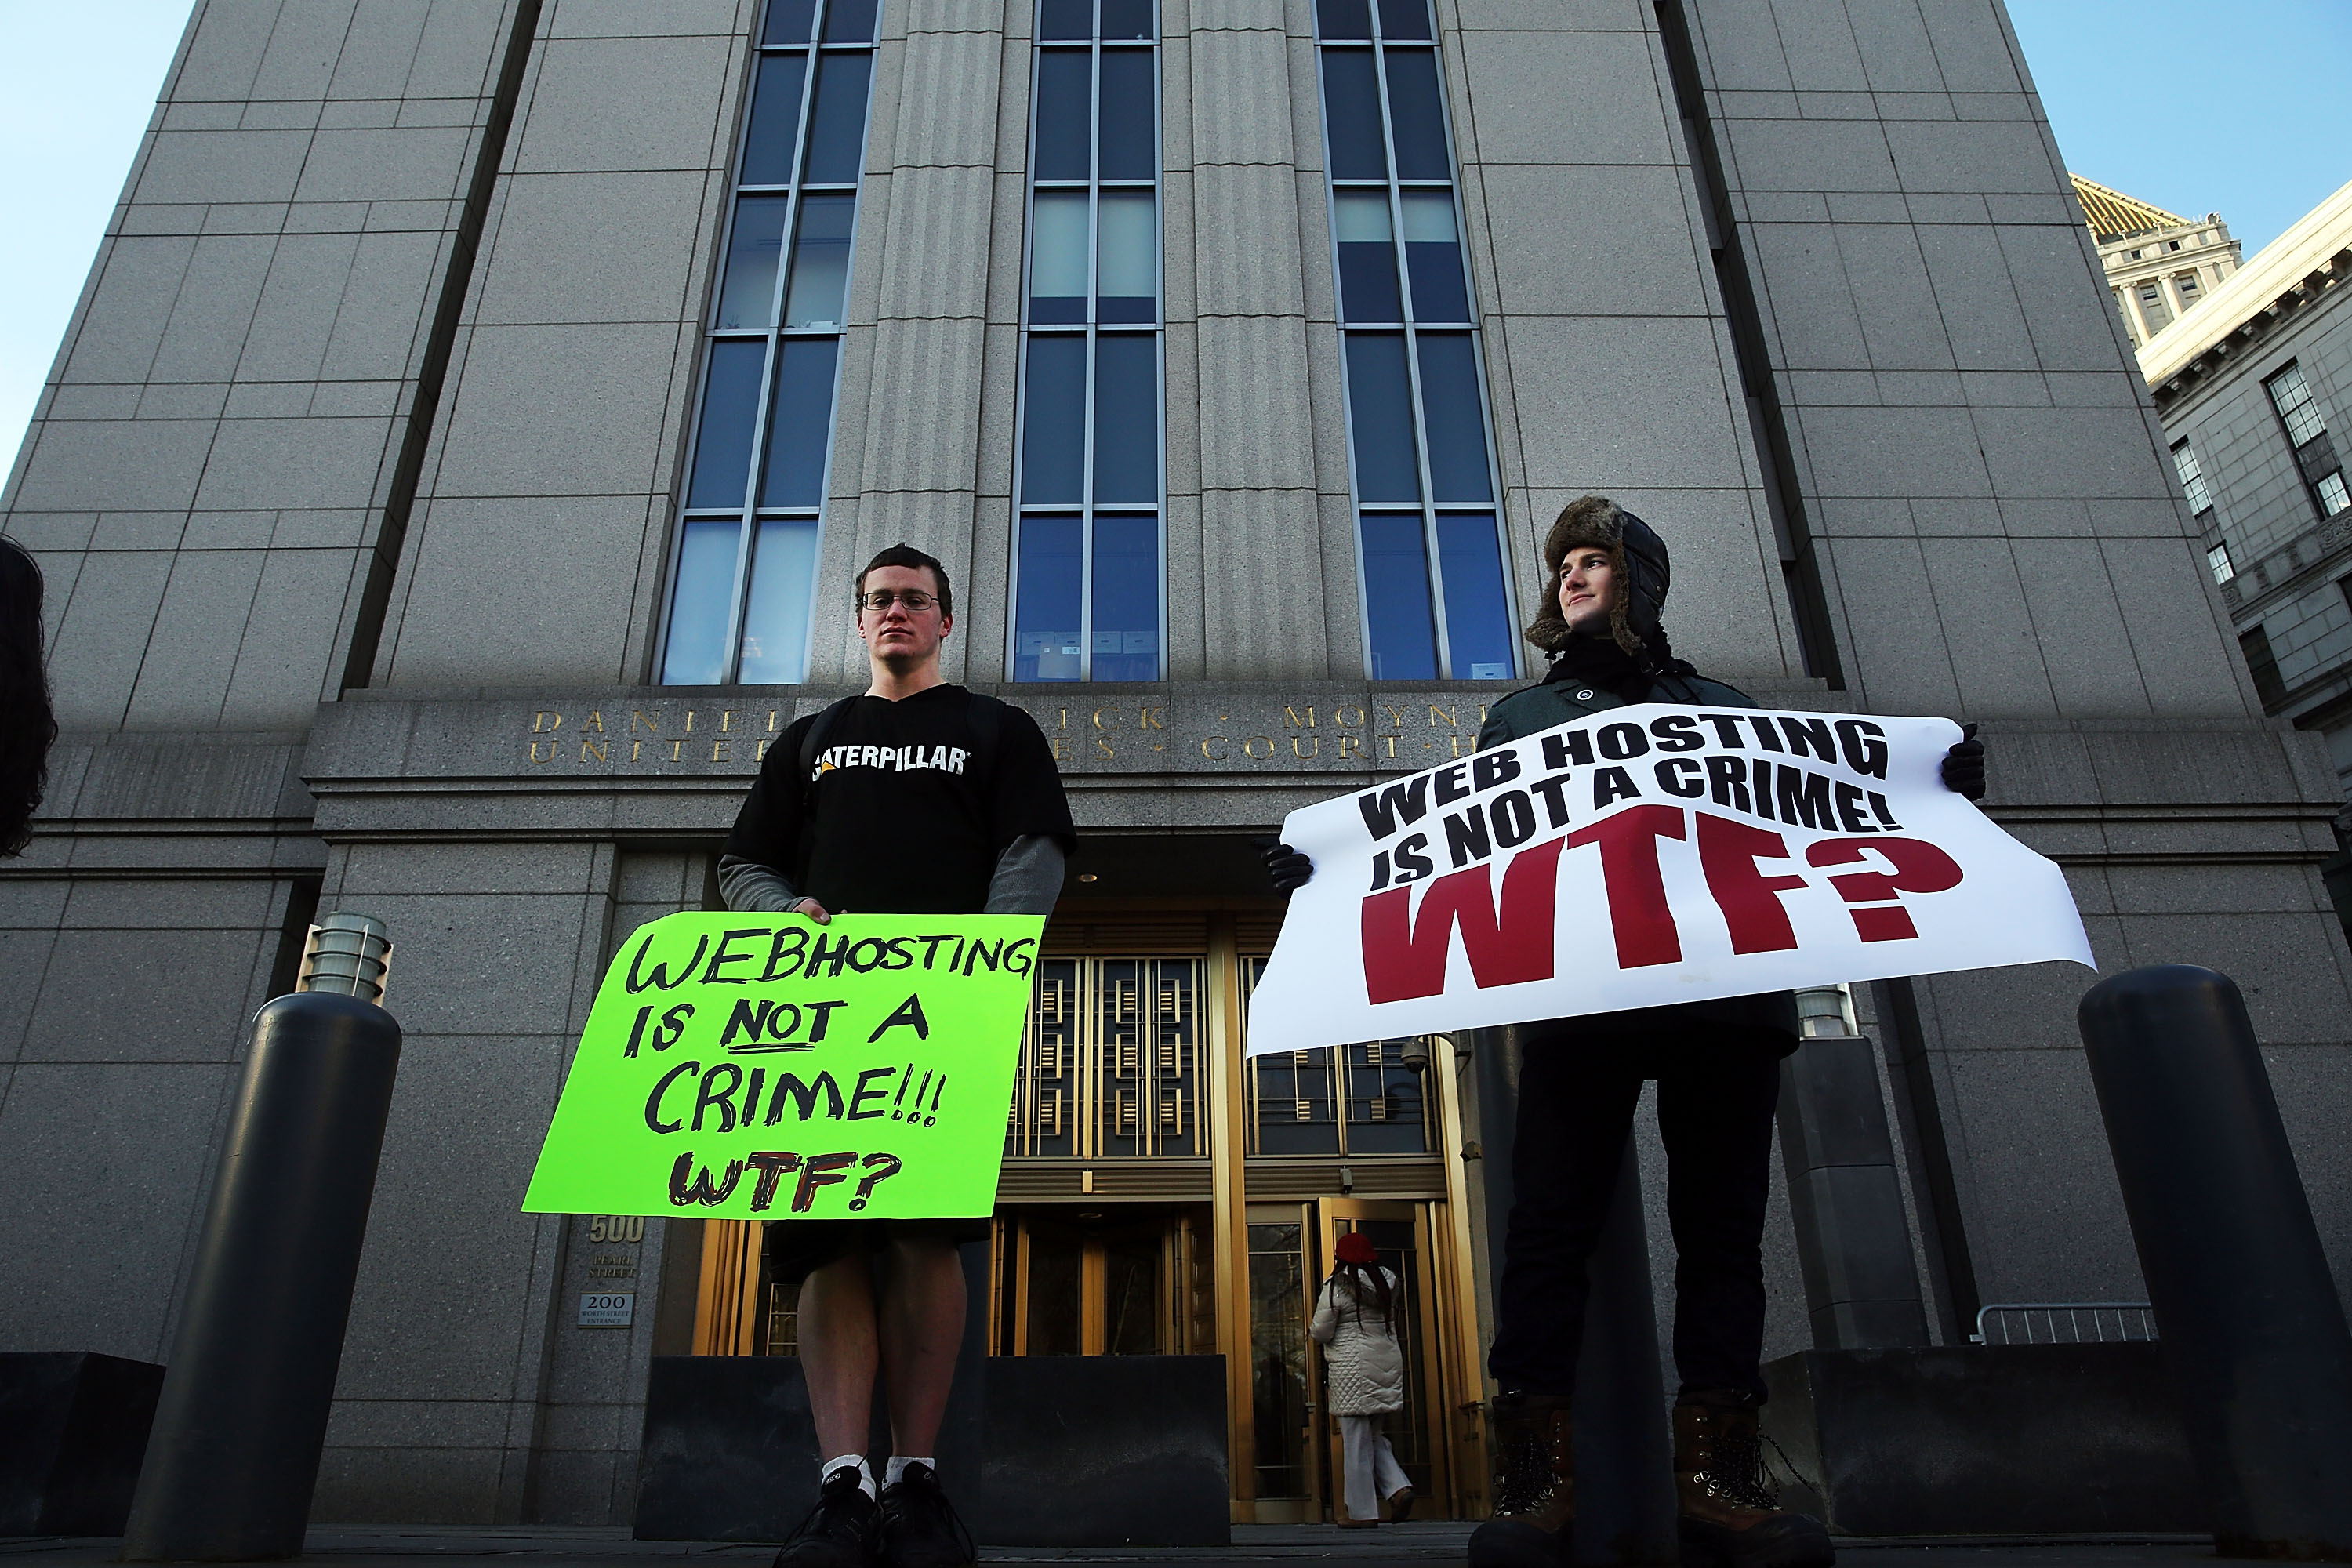 Supporters of Ross Ulbricht, the alleged creator and operator of the Silk Road underground market, stand in front of a Manhattan federal court house on the first day of jury selection for his trial on January 13, 2015 in New York City. (Spencer Platt—Getty Images)